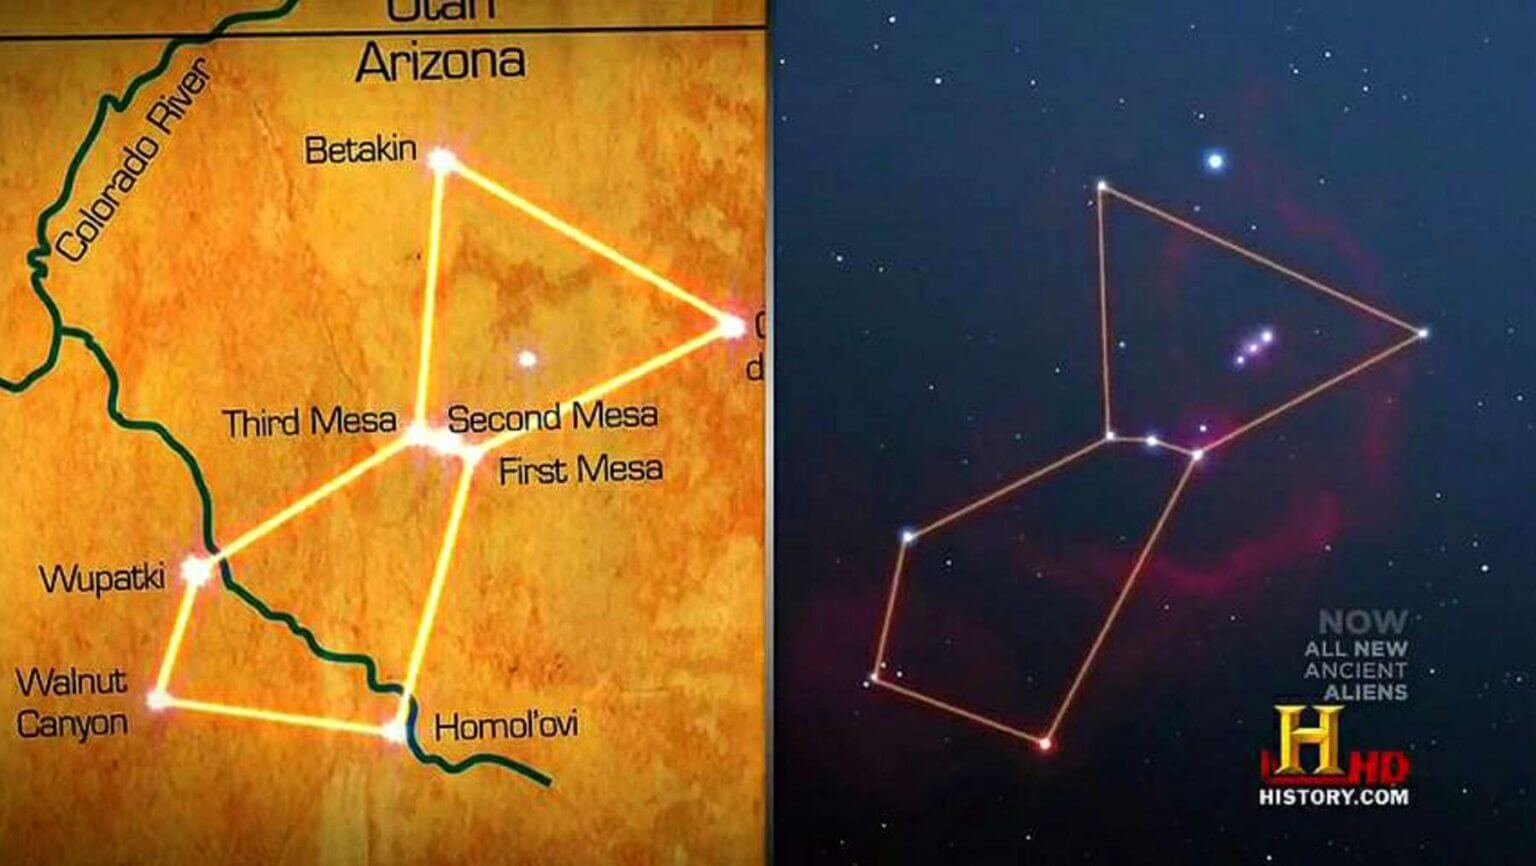 The three Hopi Mesas align perfectly with the constellation of Orion © History.com